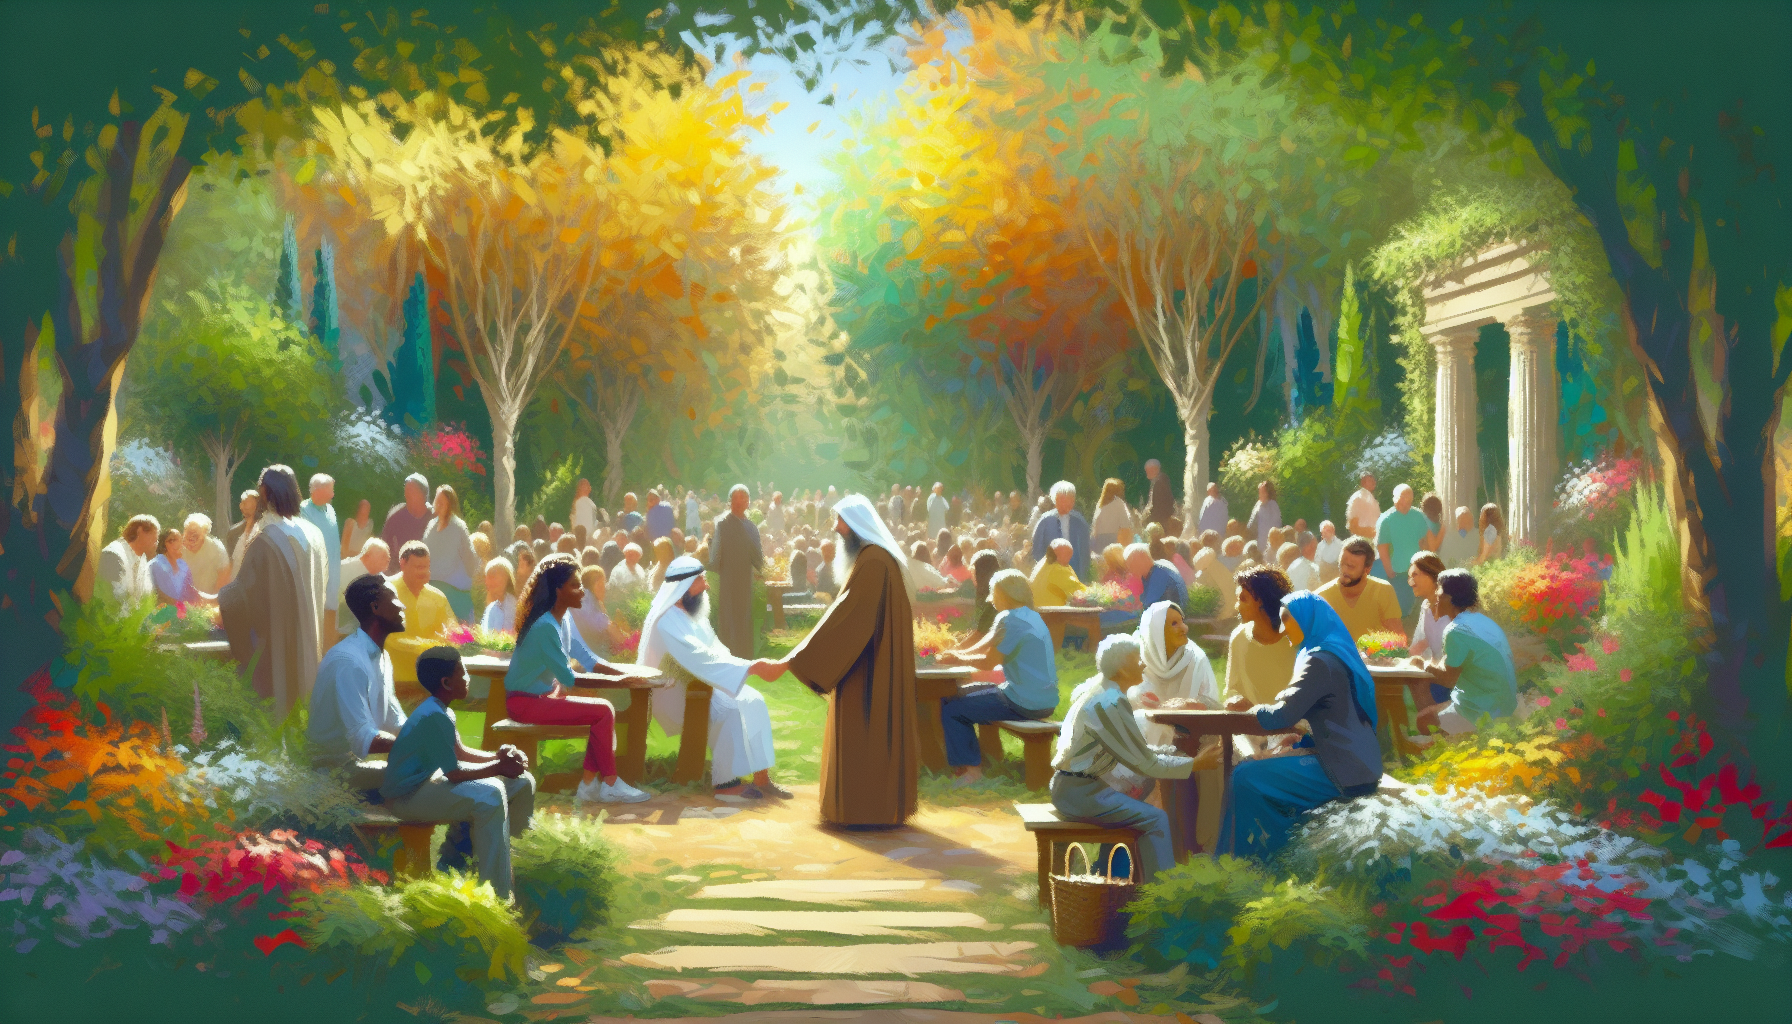 Create a serene and harmonious digital painting depicting a diverse group of people from various cultures and backgrounds gathering in a lush, sunlit garden, each person interacting lovingly with othe